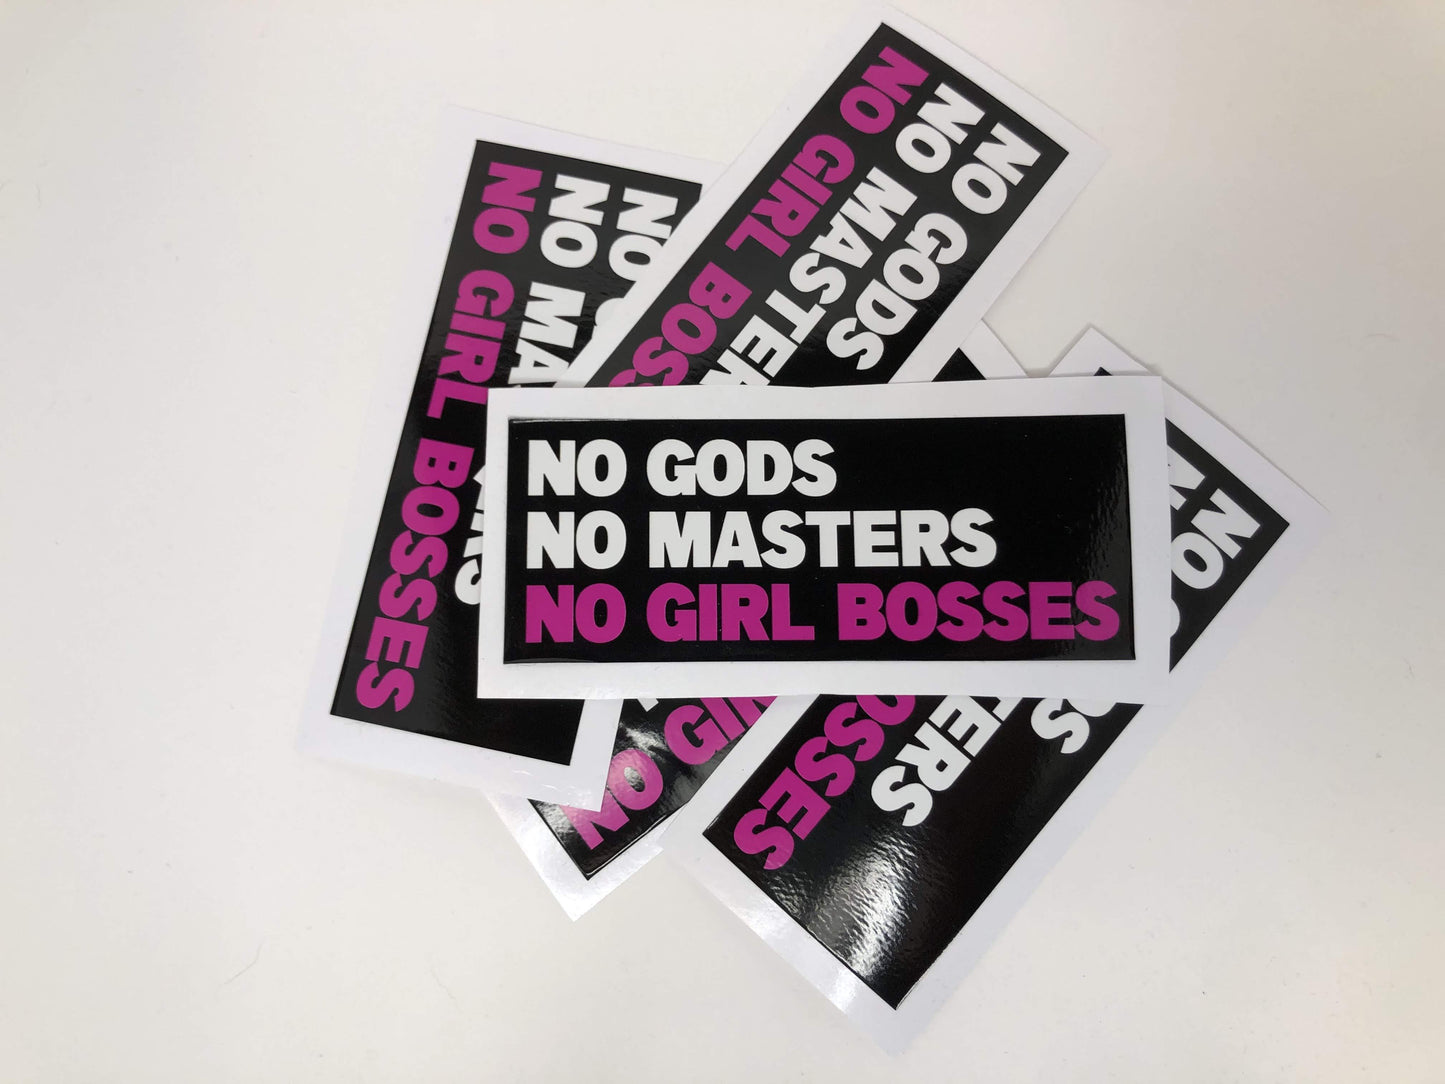 A black rectangle with the words "no gods no masters" in white and "no girl bosses" in pink